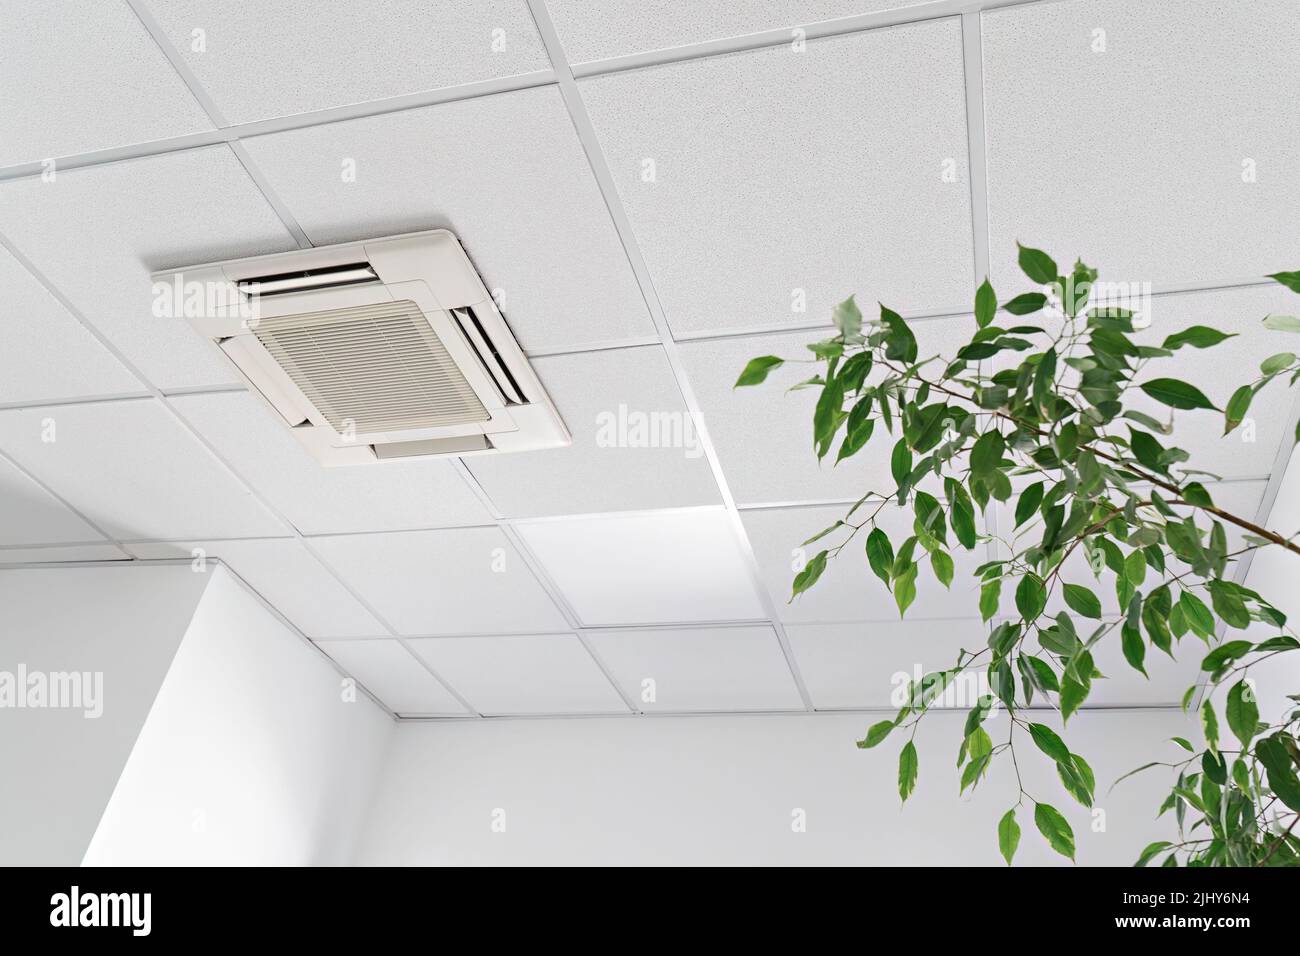 Cassette air conditioner on ceiling in modern light office or apartment  with green ficus plant leaves. Indoor air quality and clean filters concept  Stock Photo - Alamy